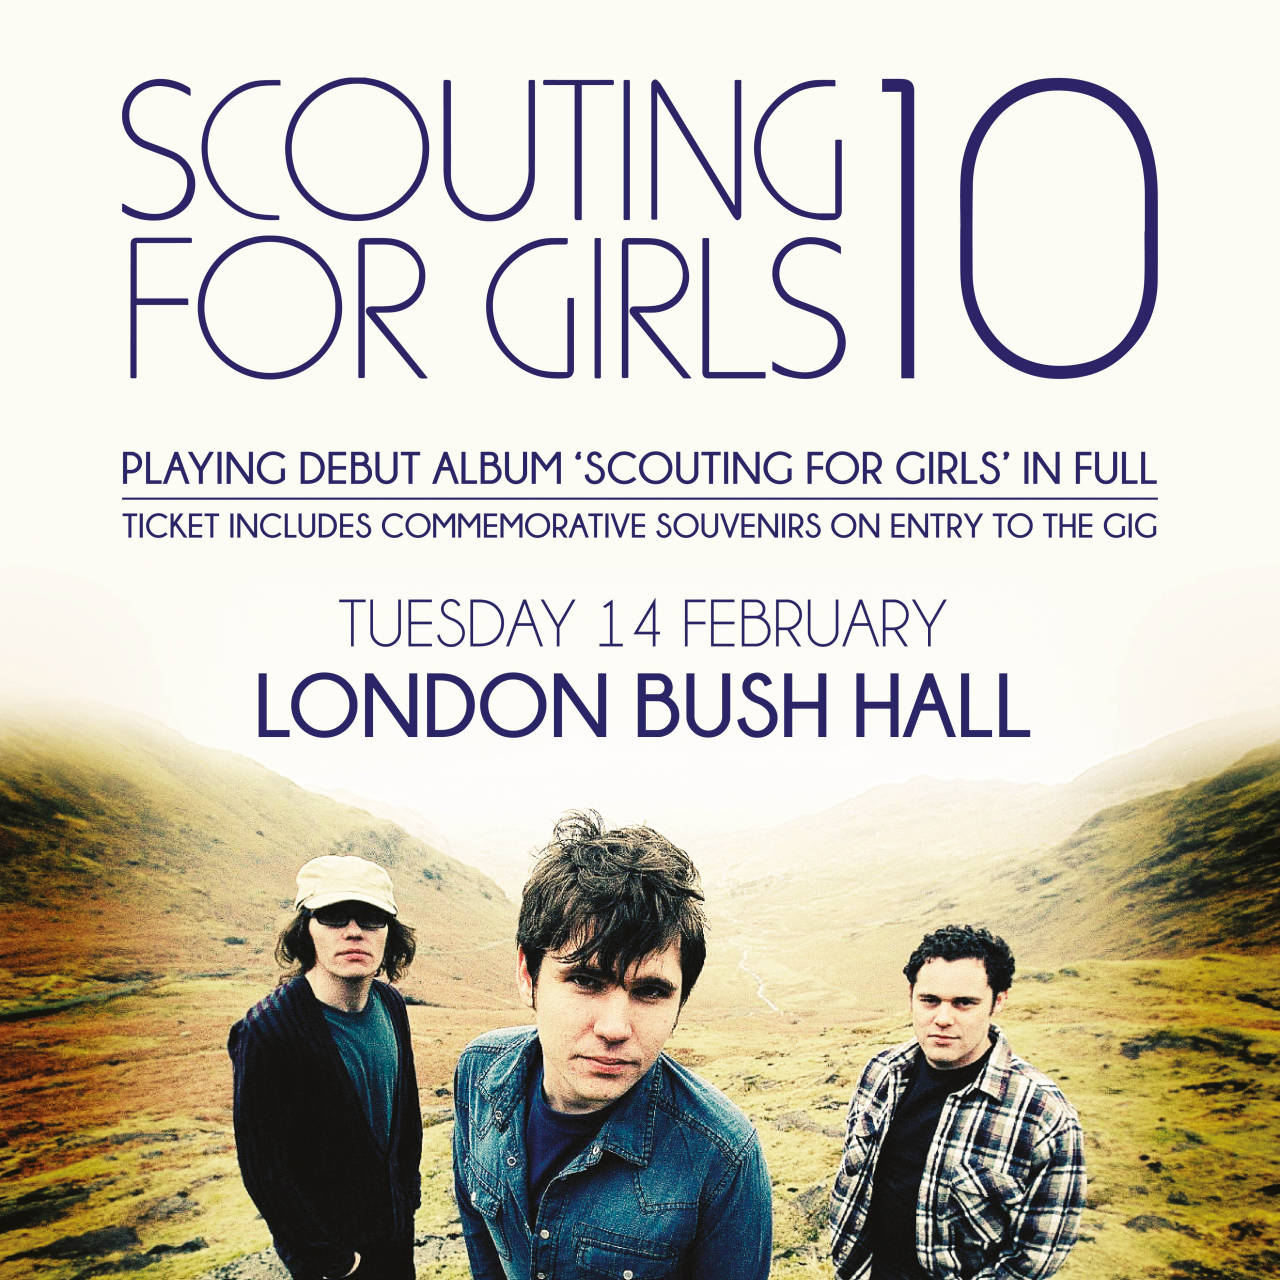 As many of you know, 2017 will mark the 10 year anniversary of the release of Scouting For Girls debut album. To celebrate a decade together as a band, Scouting For Girls will be playing a very special intimate gig at London’s Bush Hall on 14th...